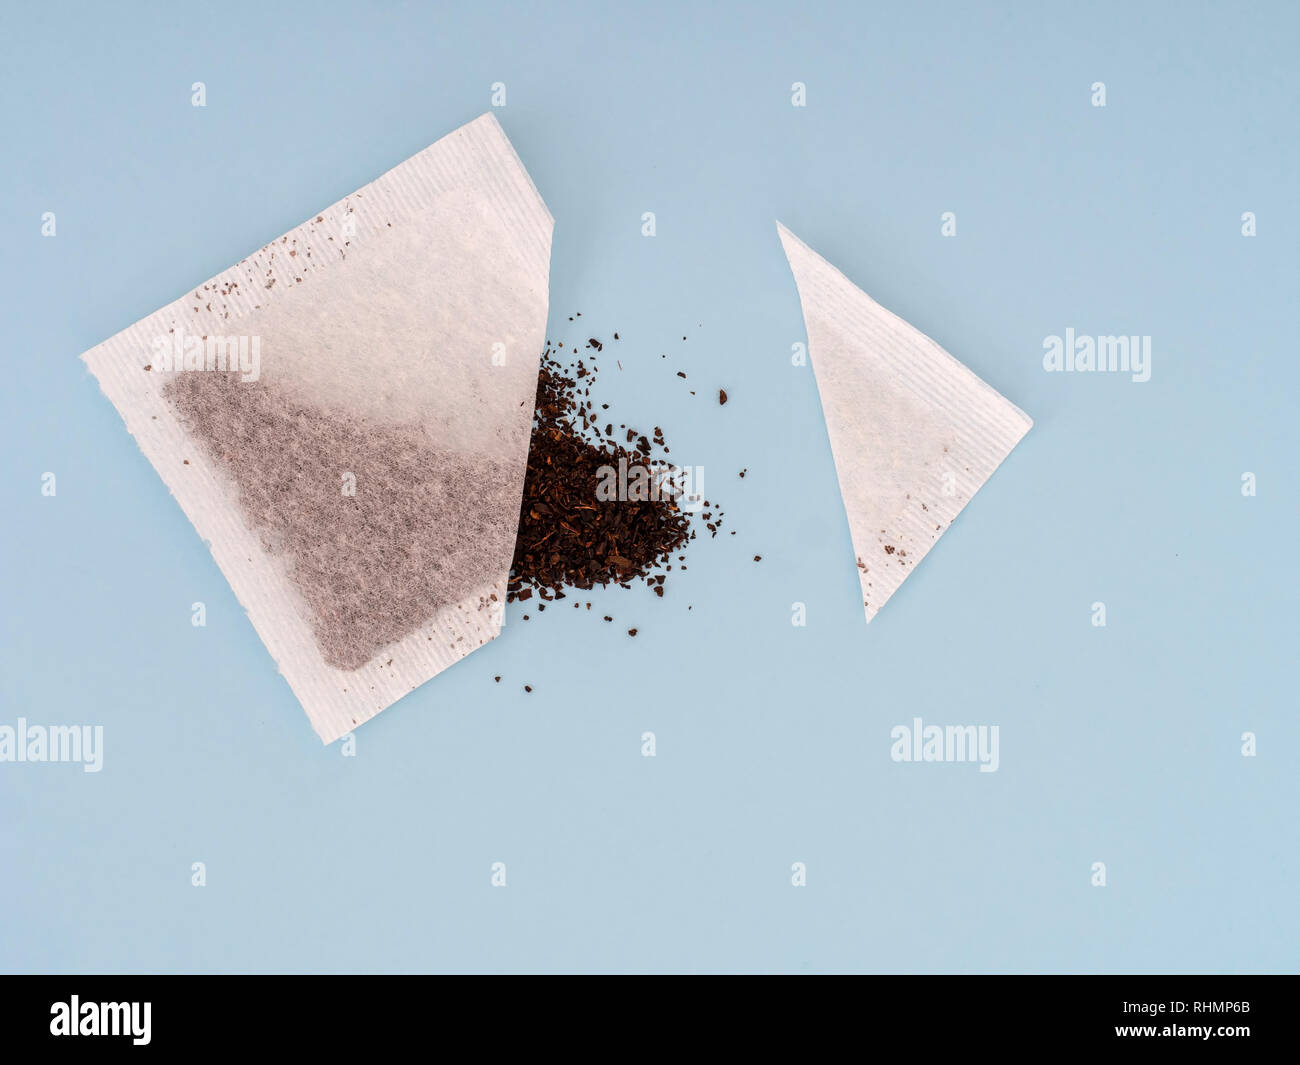 Tea bag sachet cut open to see contents and quality of leaves inside, on pale blue background. Stock Photo